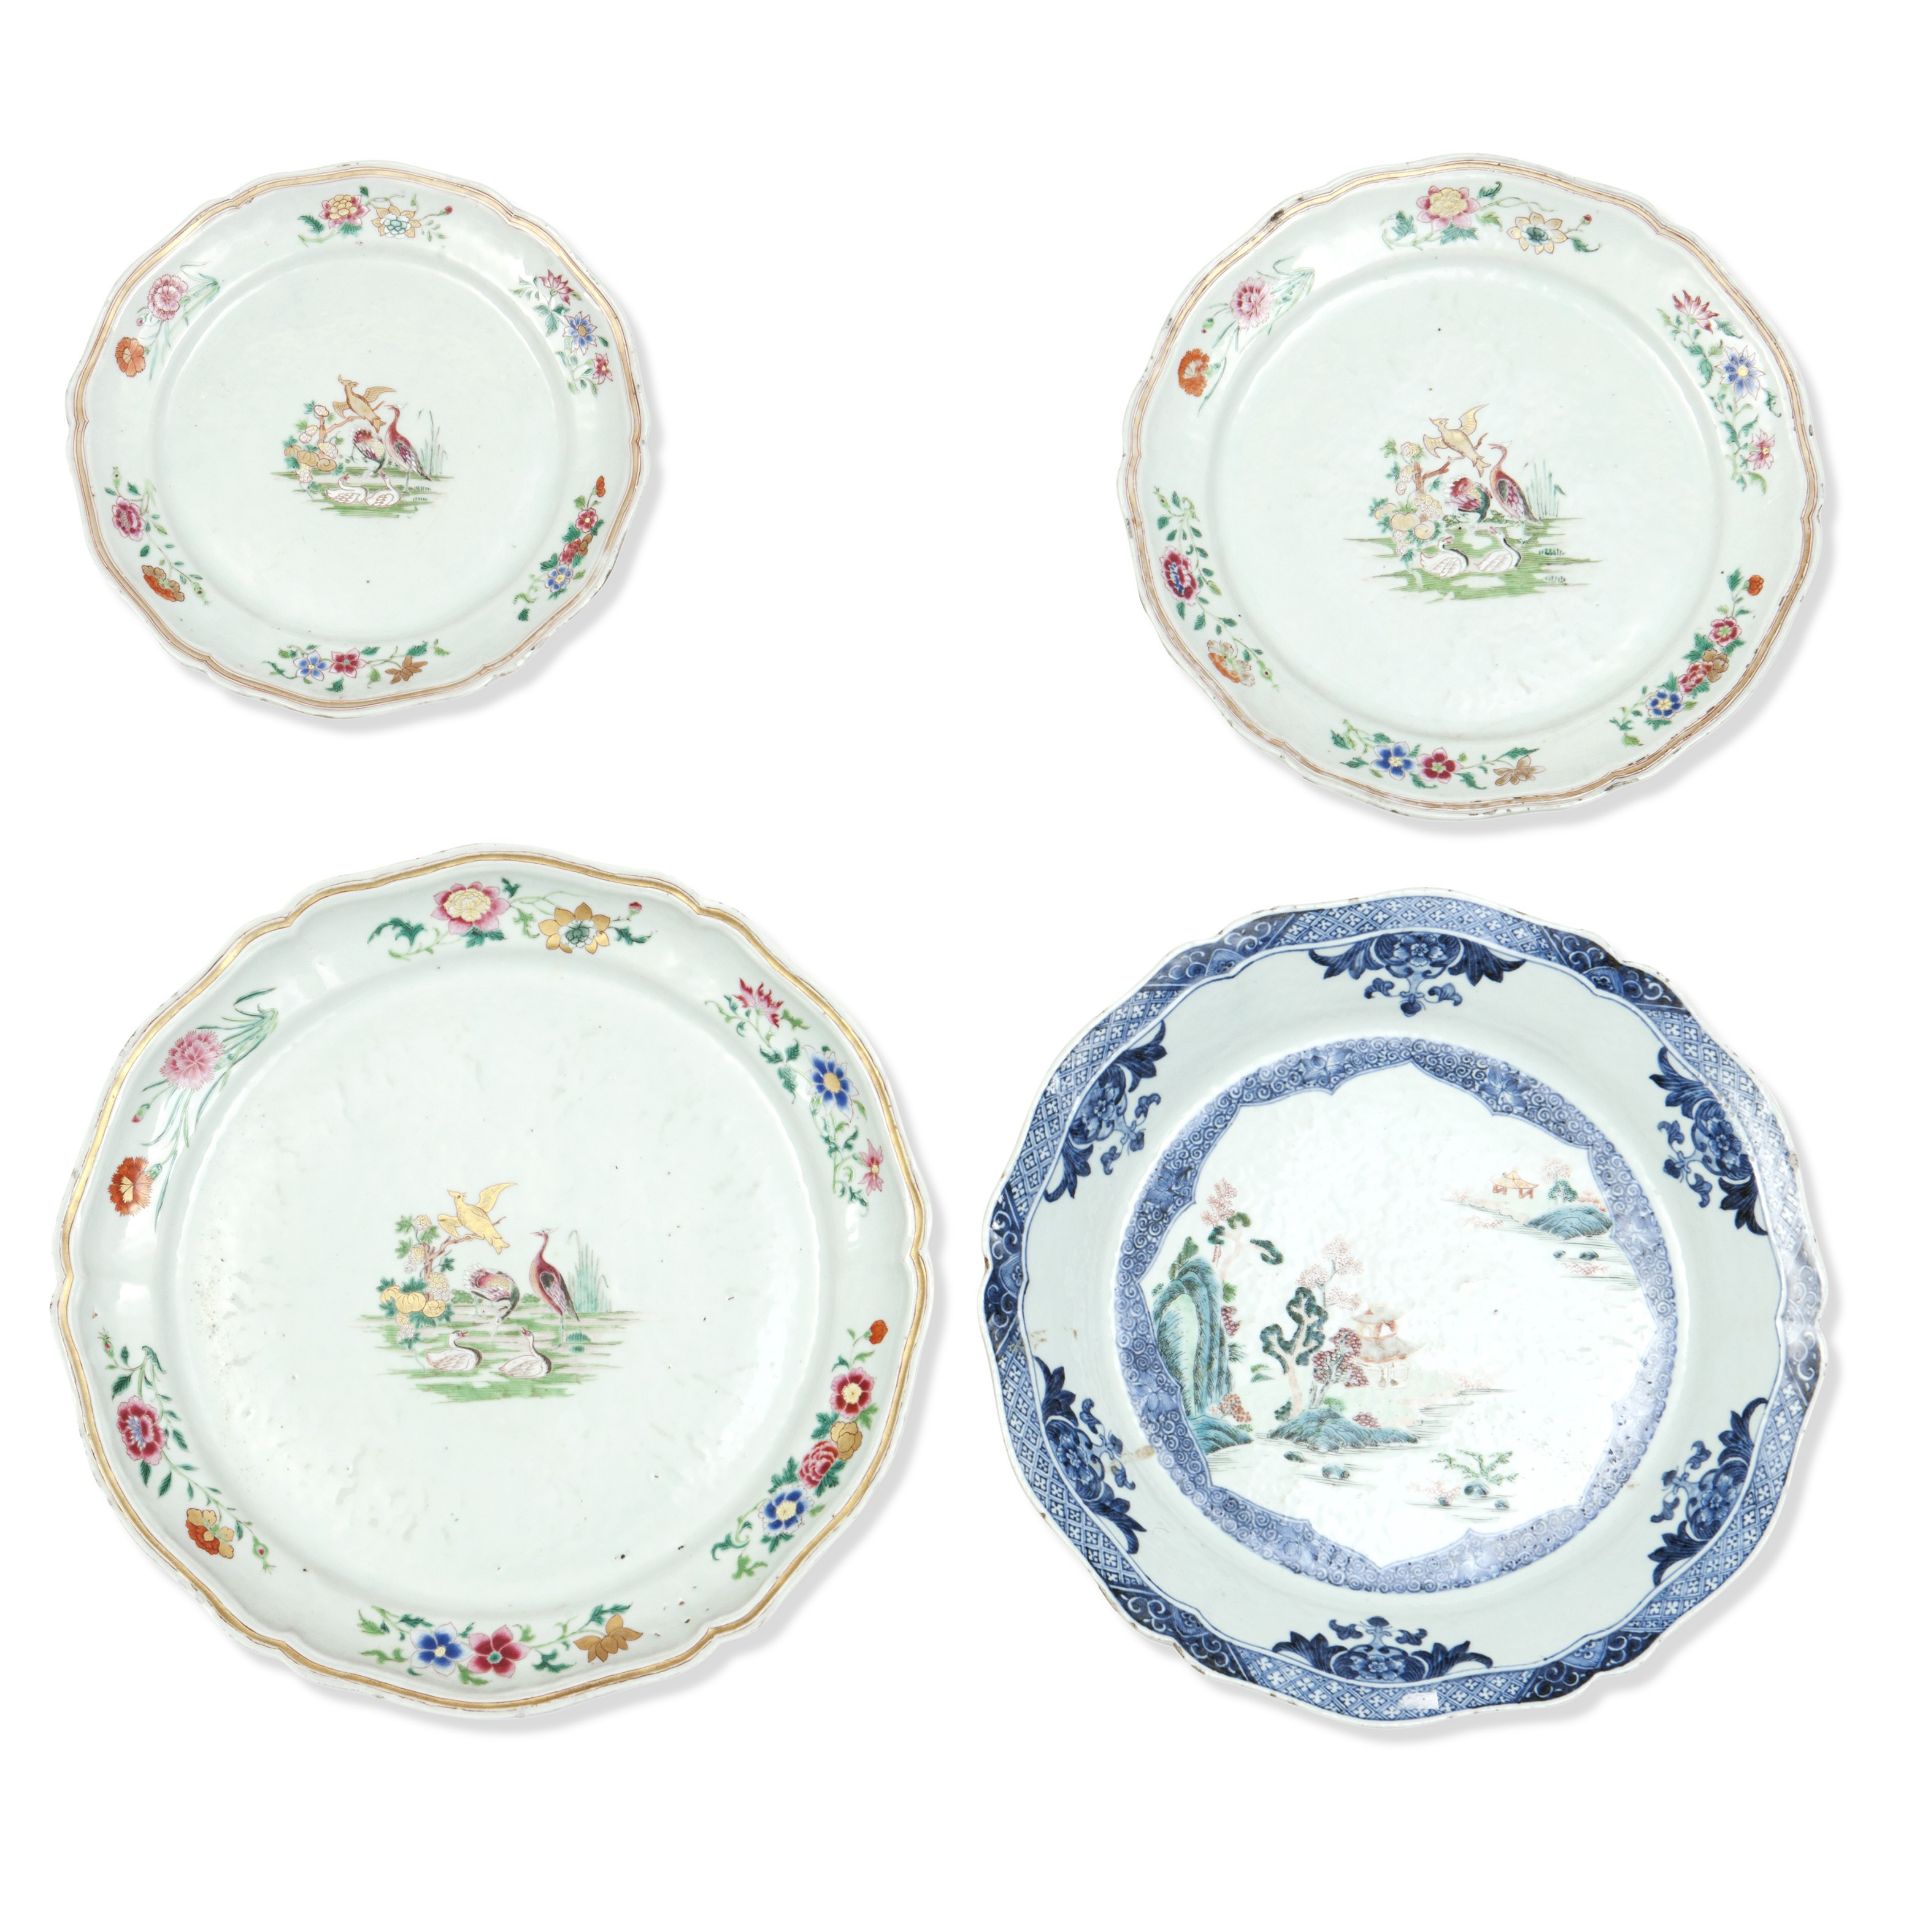 A GRADUATED SET OF THREE FAMILLE ROSE CHARGERS (4)